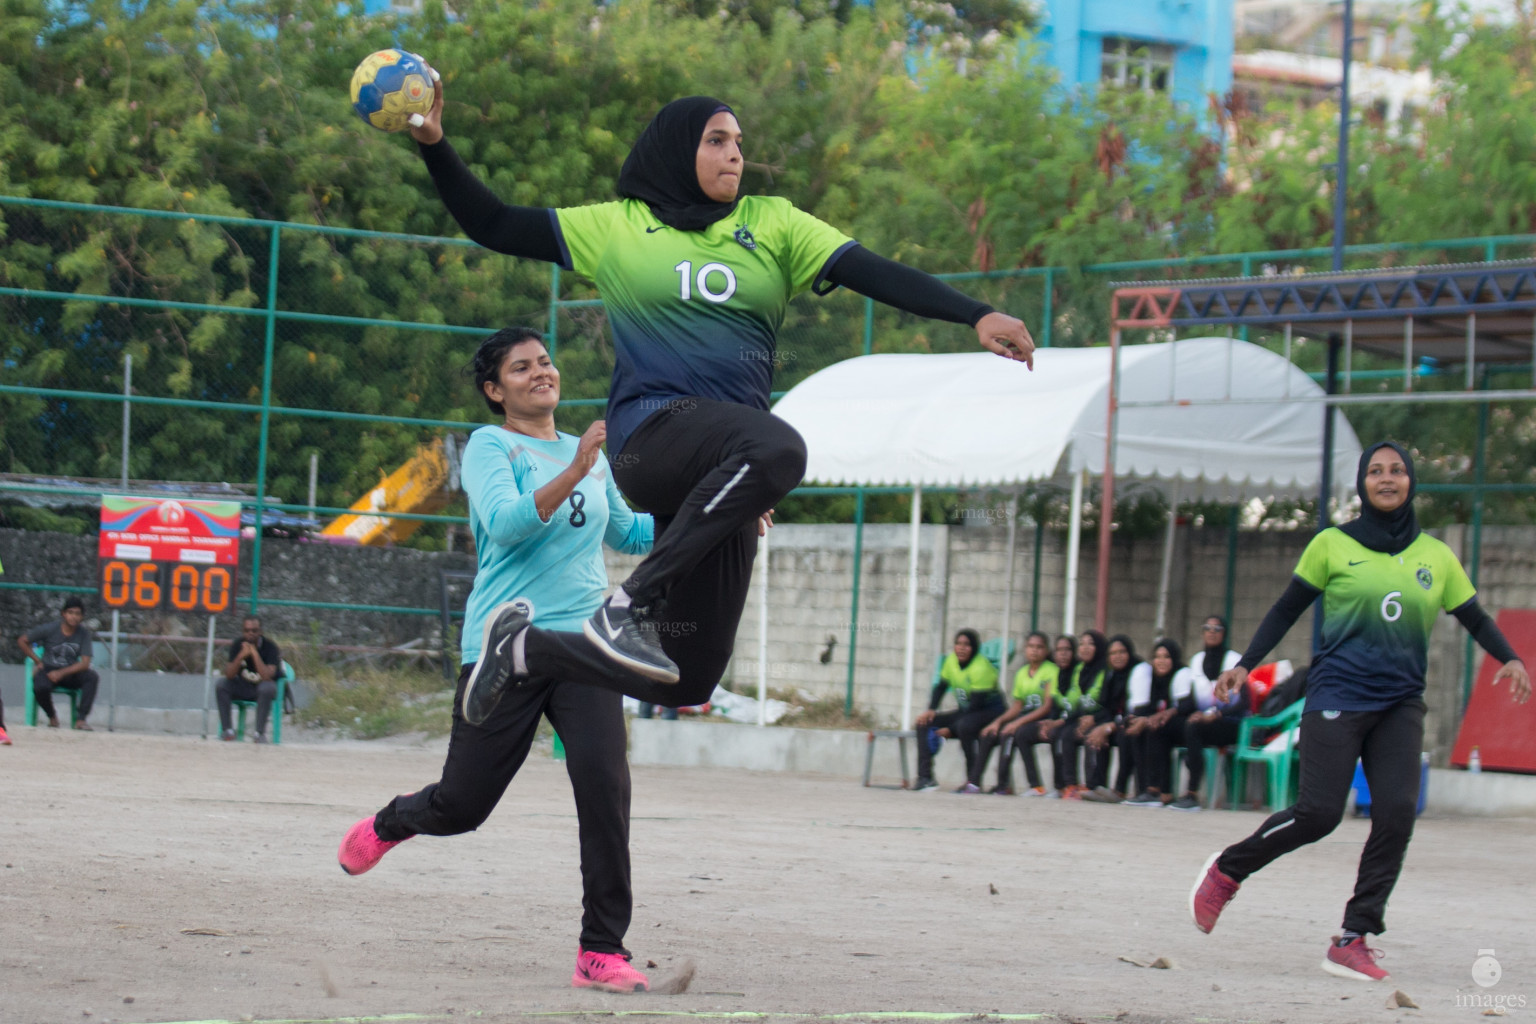 Maldives Immigration vs Ministry of Finance in Inter Office Handball Tournament 2019 - Women's 2nd Division Final, held in National Handball Grounds on 5th March 2019 (Hassan Simah /Images.mv)